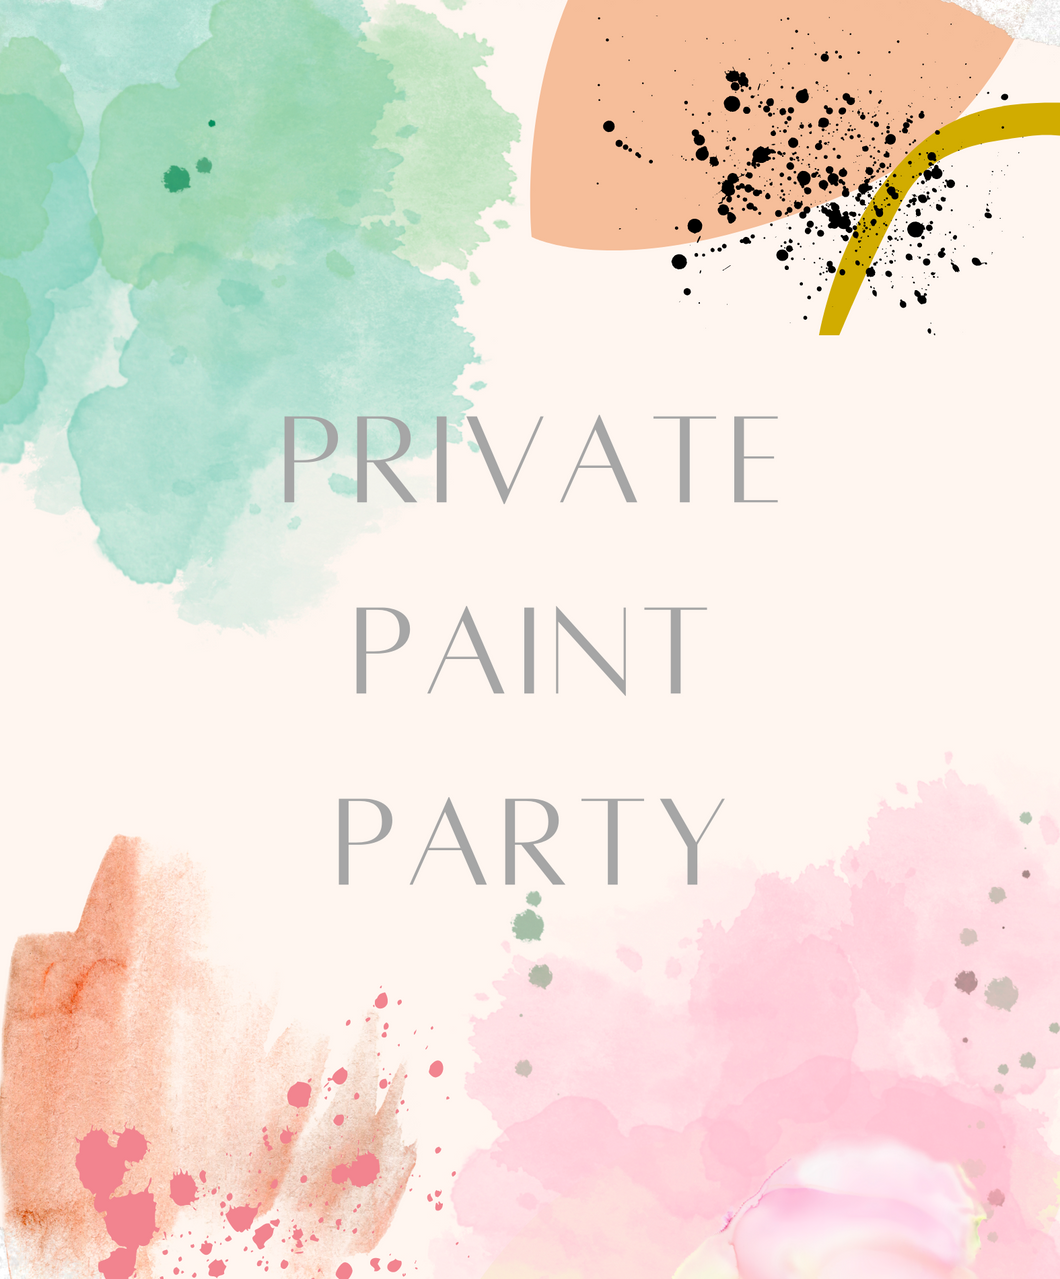 Private Event - Alana's Hens - SATURDAY 25th May - 4.30/5pm